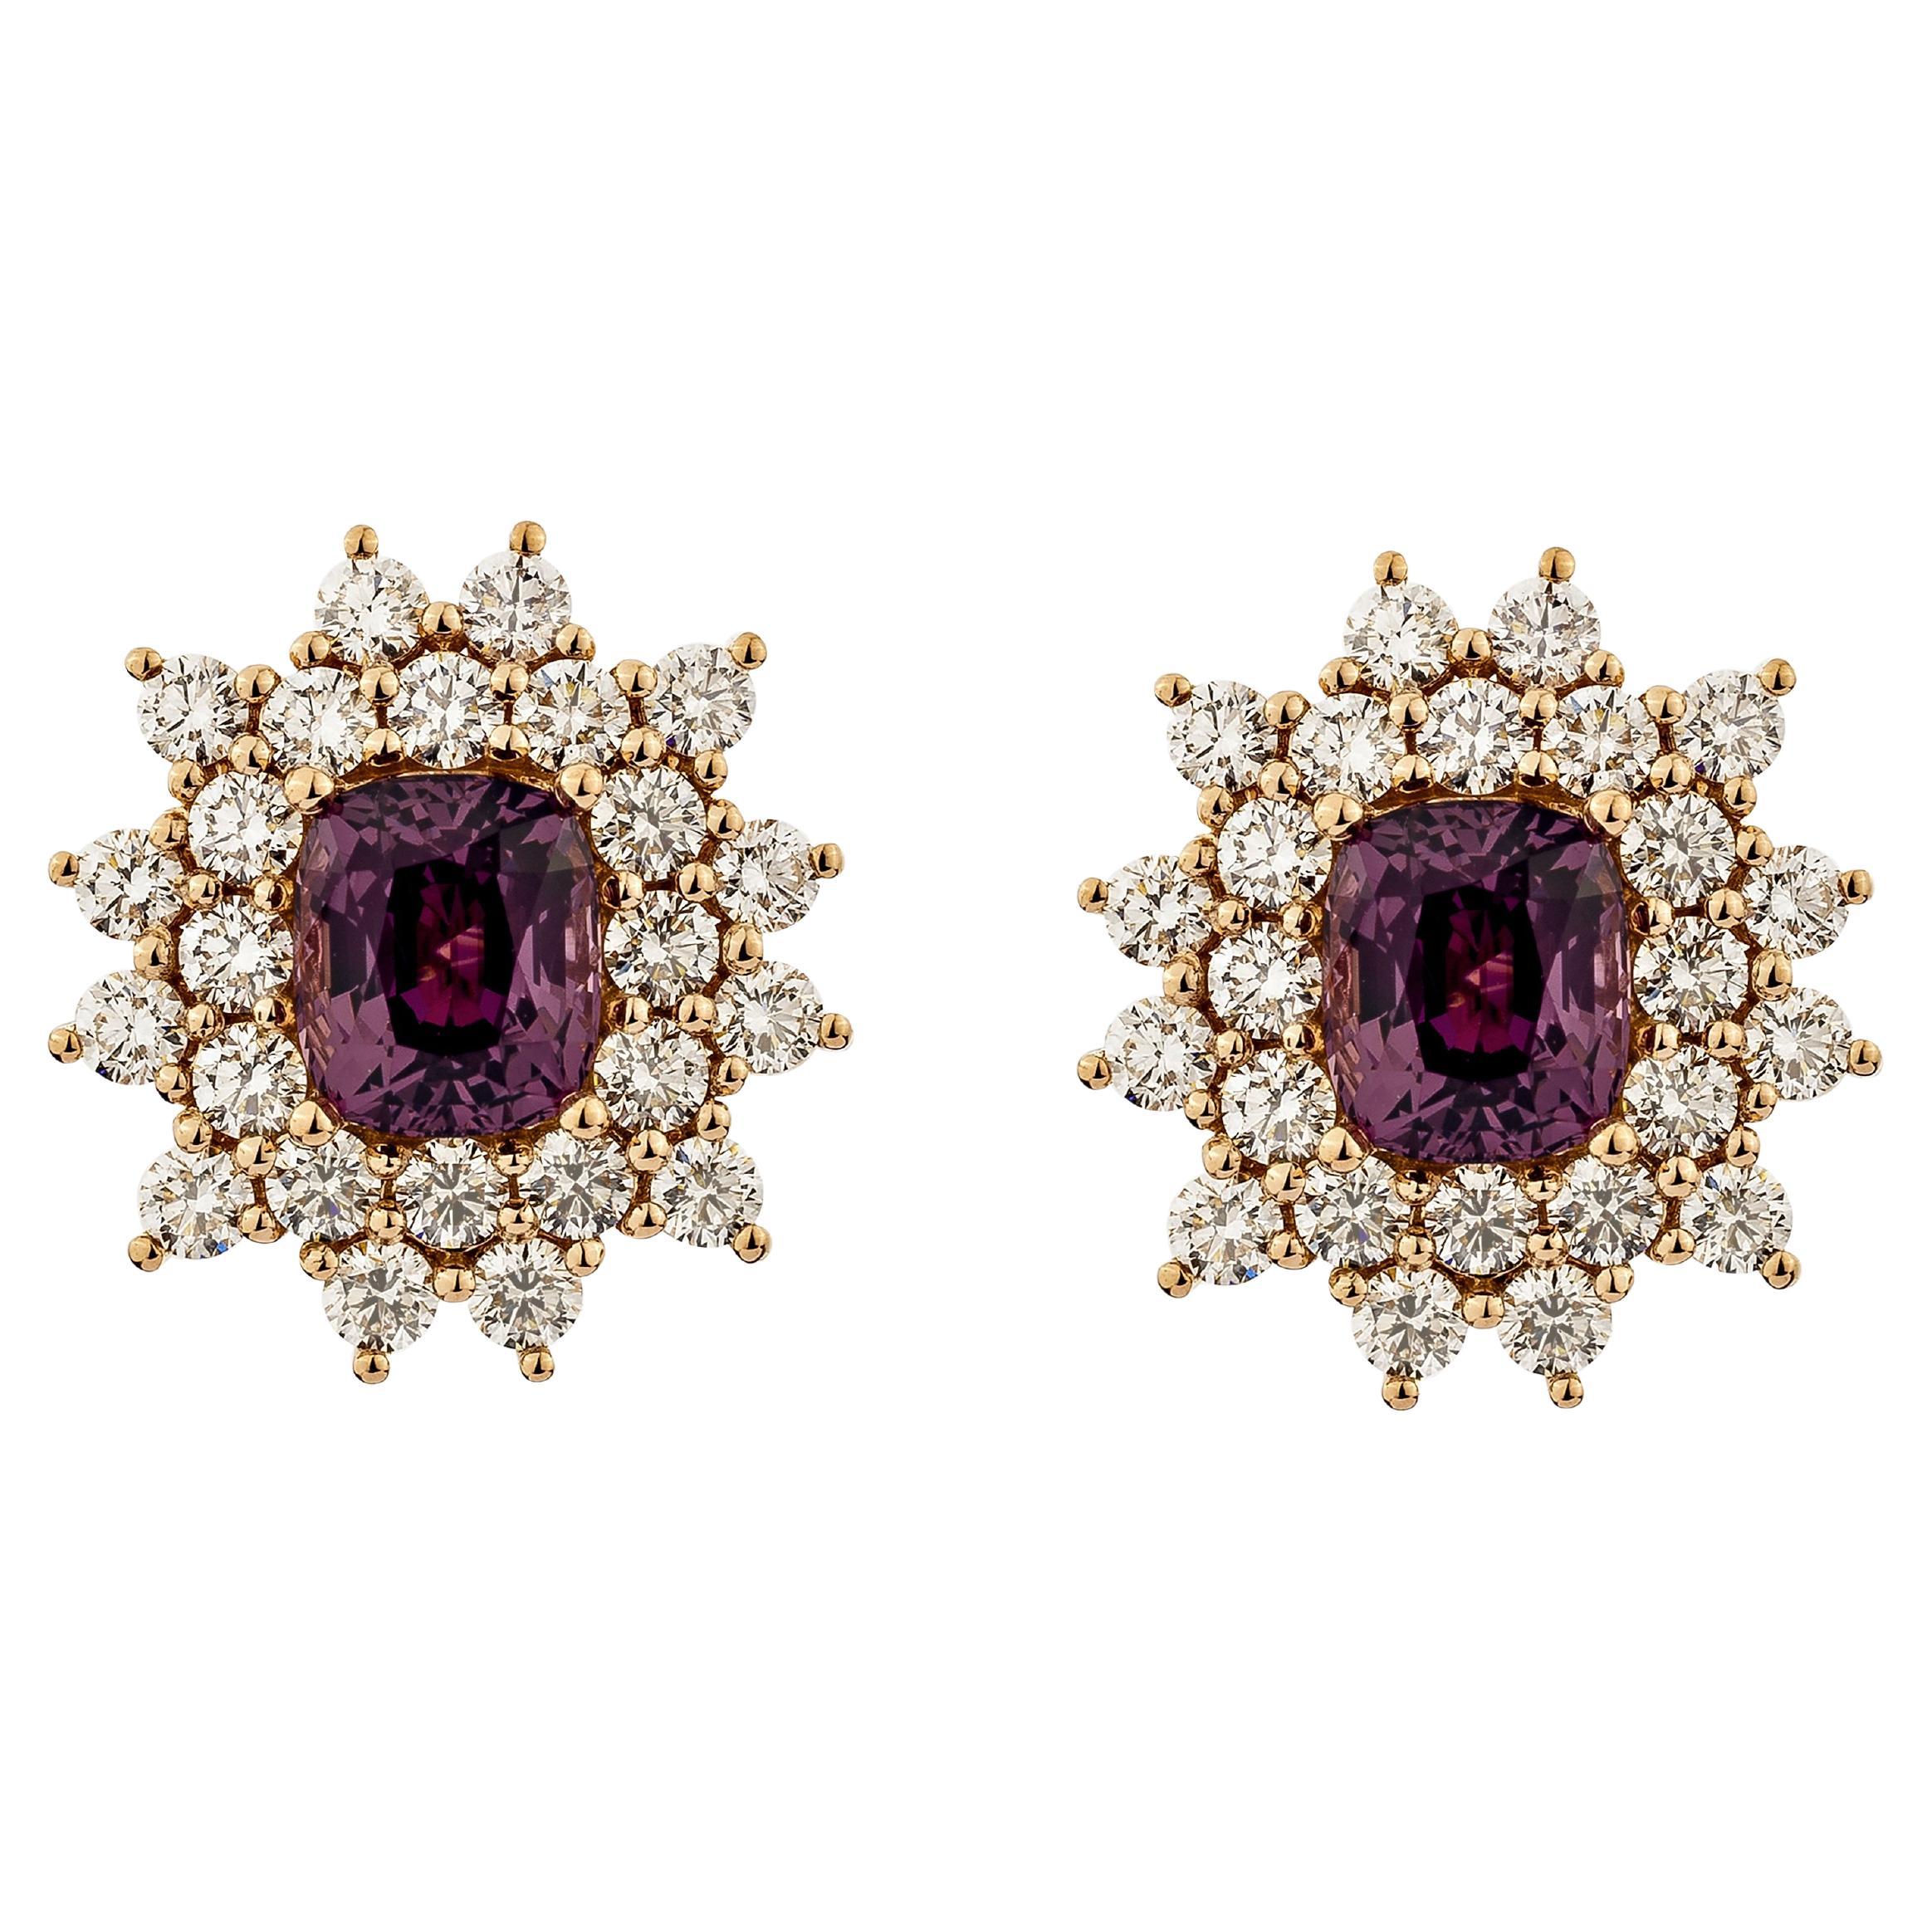 3.82 carat Spinel stud Earrings in 18Karat Rose Gold with White Diamond. For Sale